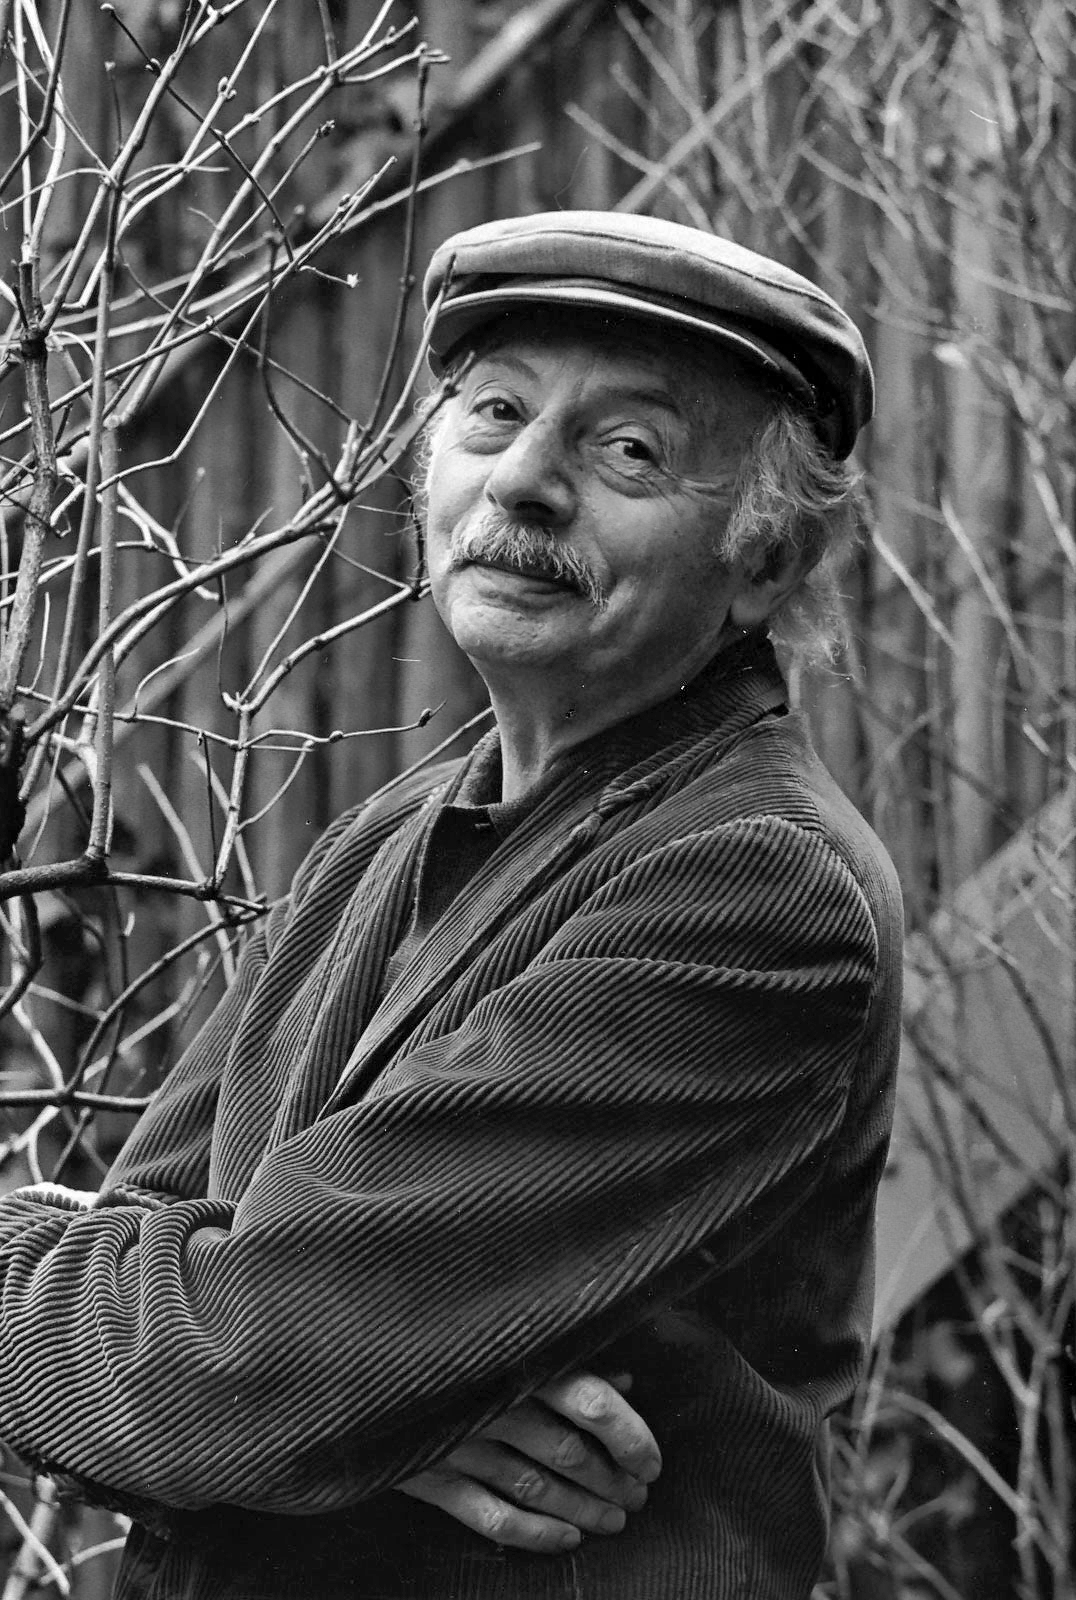 Stanley Kunitz (1905-2006) served as Poetry Consultant to the Library of Congress in 1974, and again in 2000. He taught Louis Glück at Columbia University in the 1960s. (Photo by Bernard Gotfryd/Getty Images)